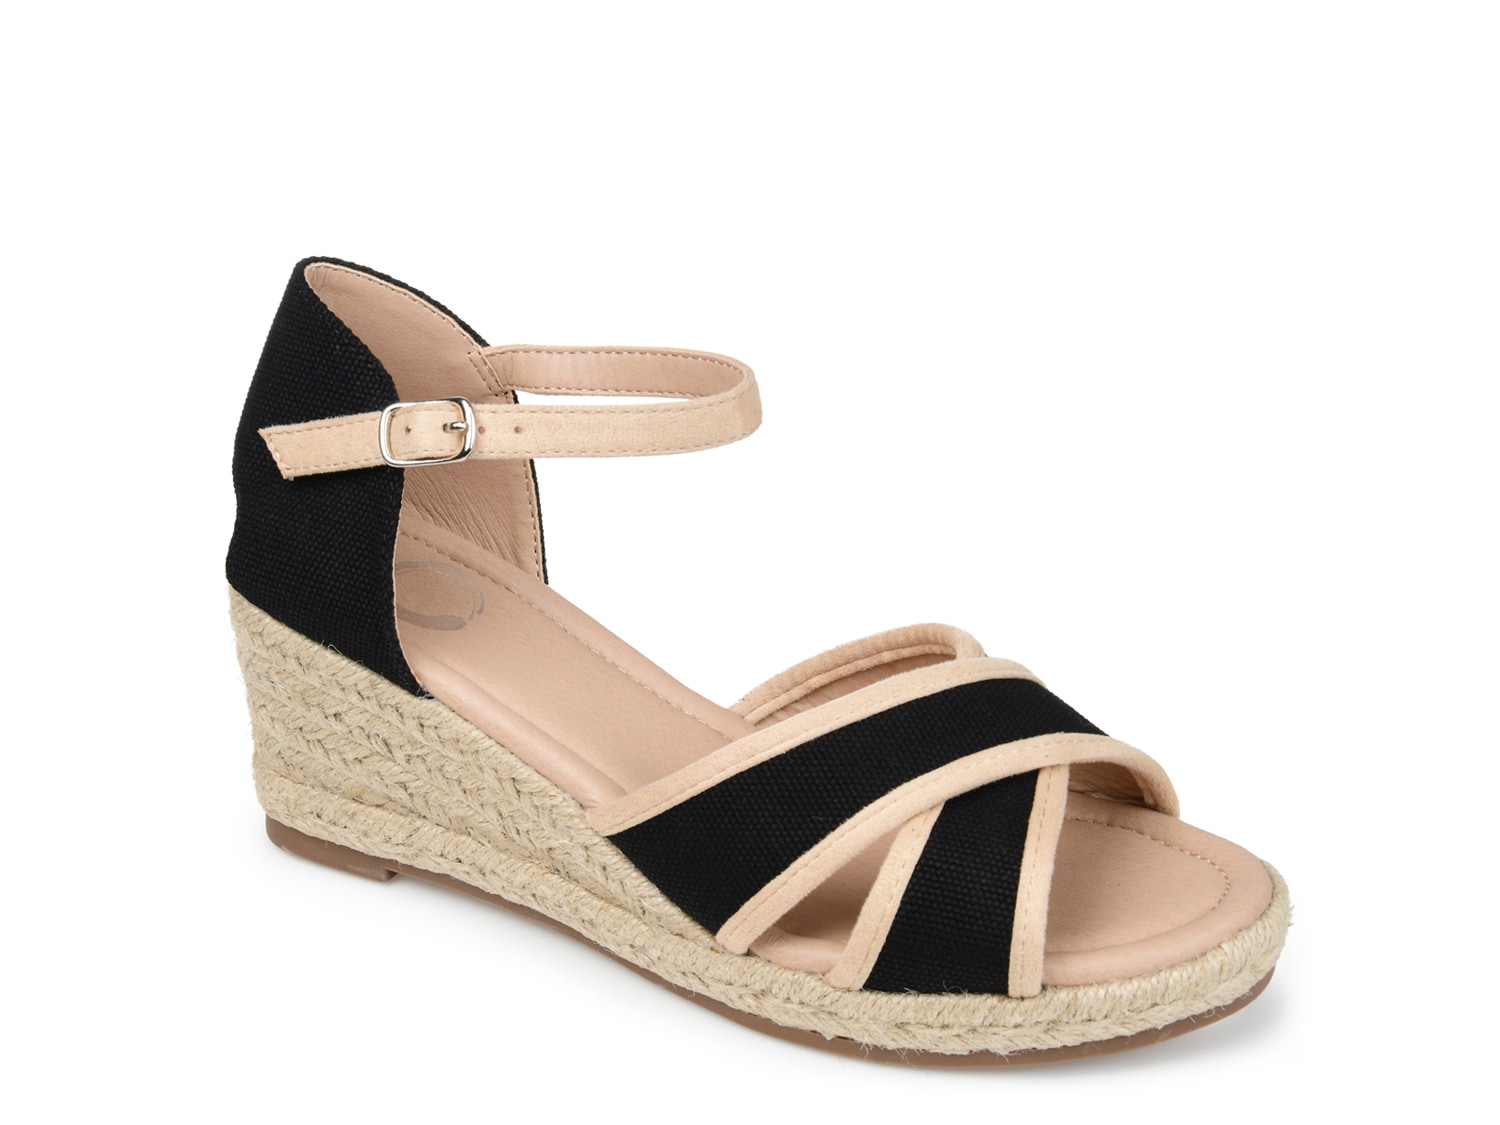 Journee Collection Brene Espadrille Sandal - Free Shipping | DSW